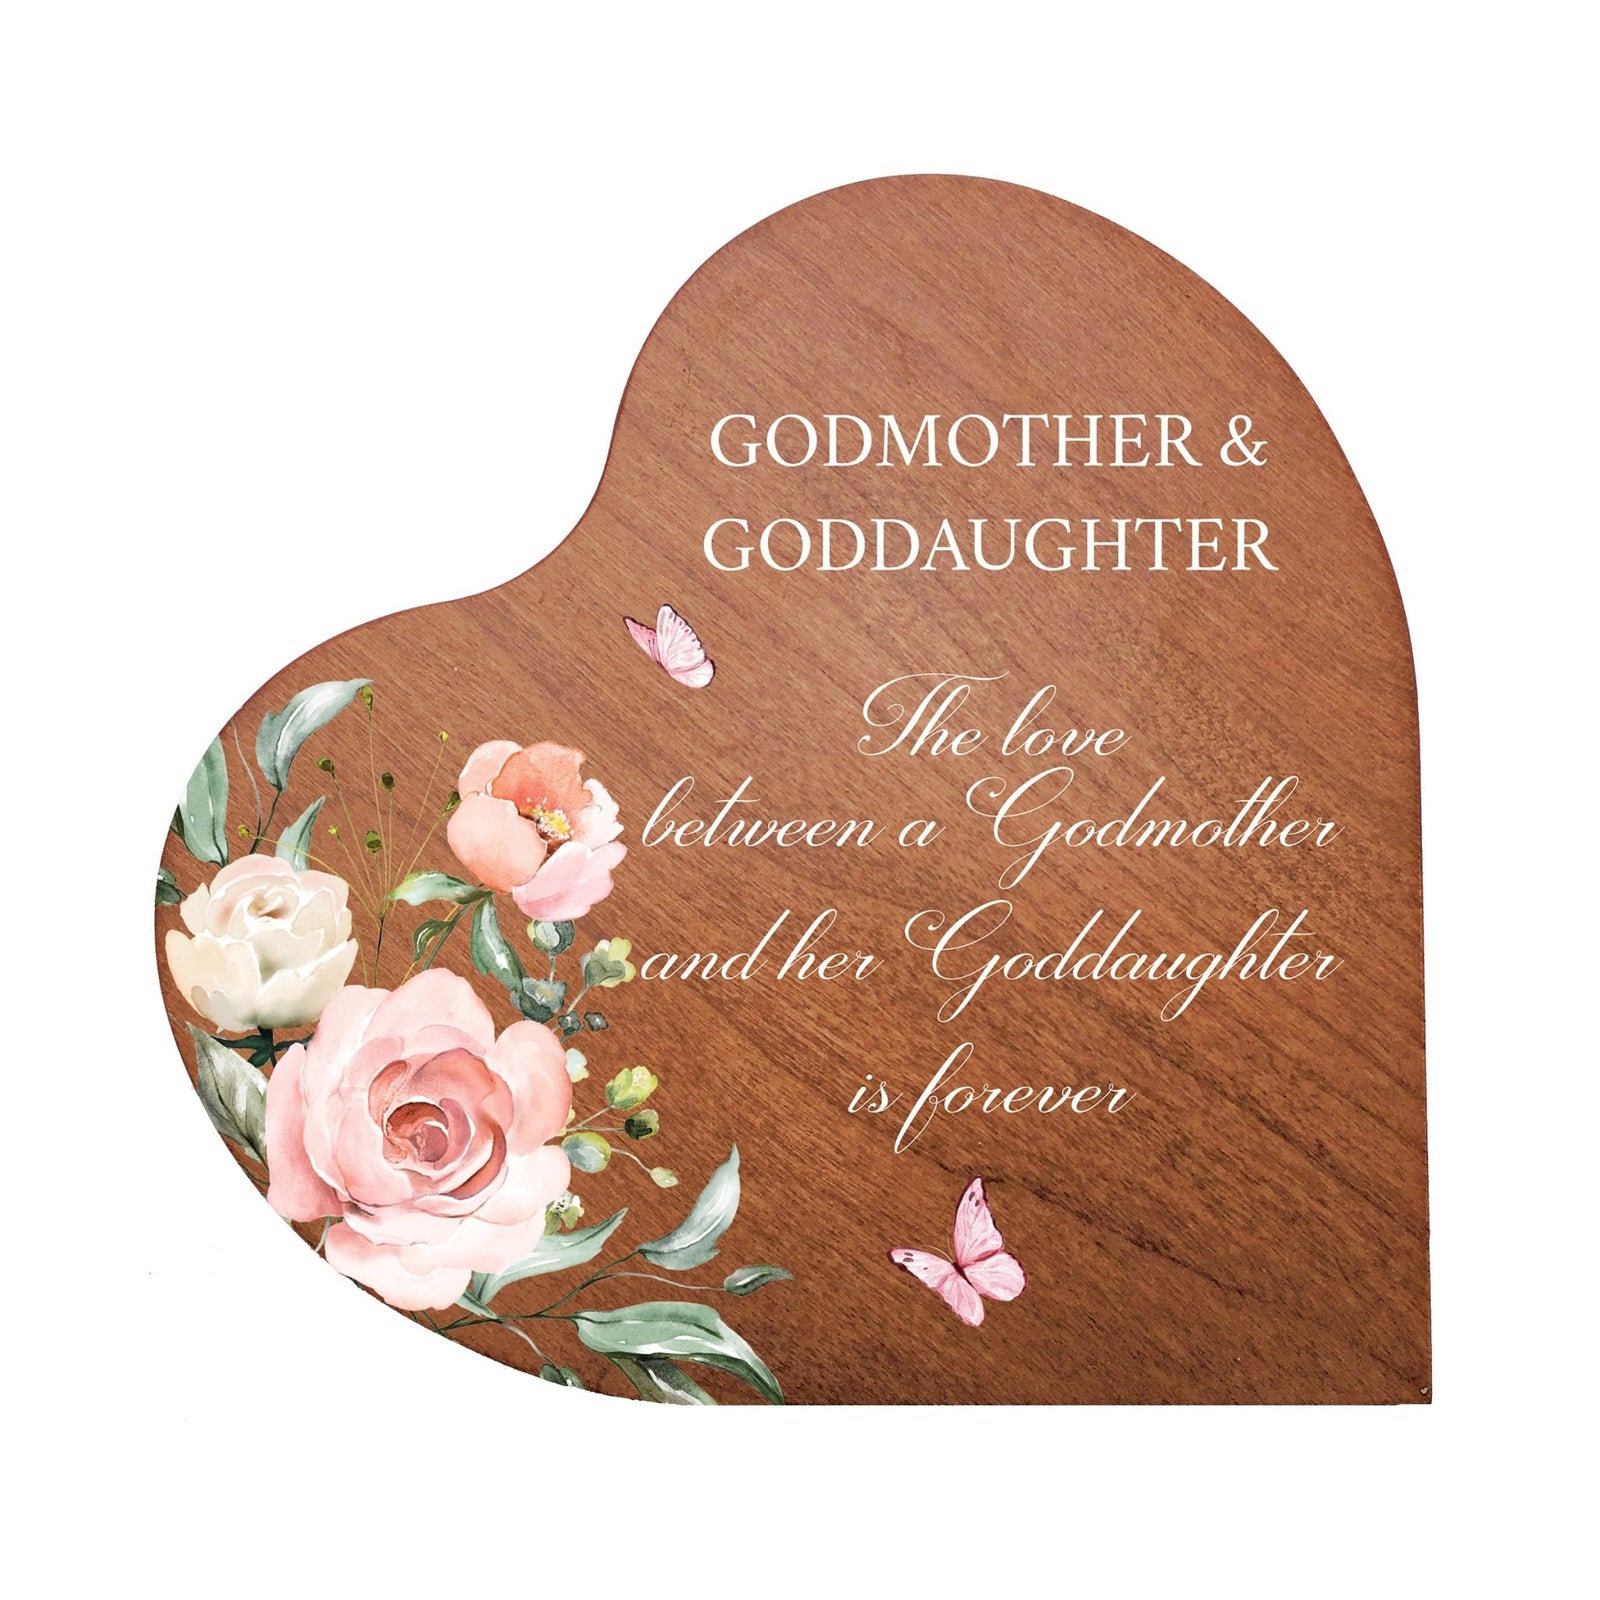 Baptism Heart Shaped Tabletop Signs Gift for Godmother and Goddaughter